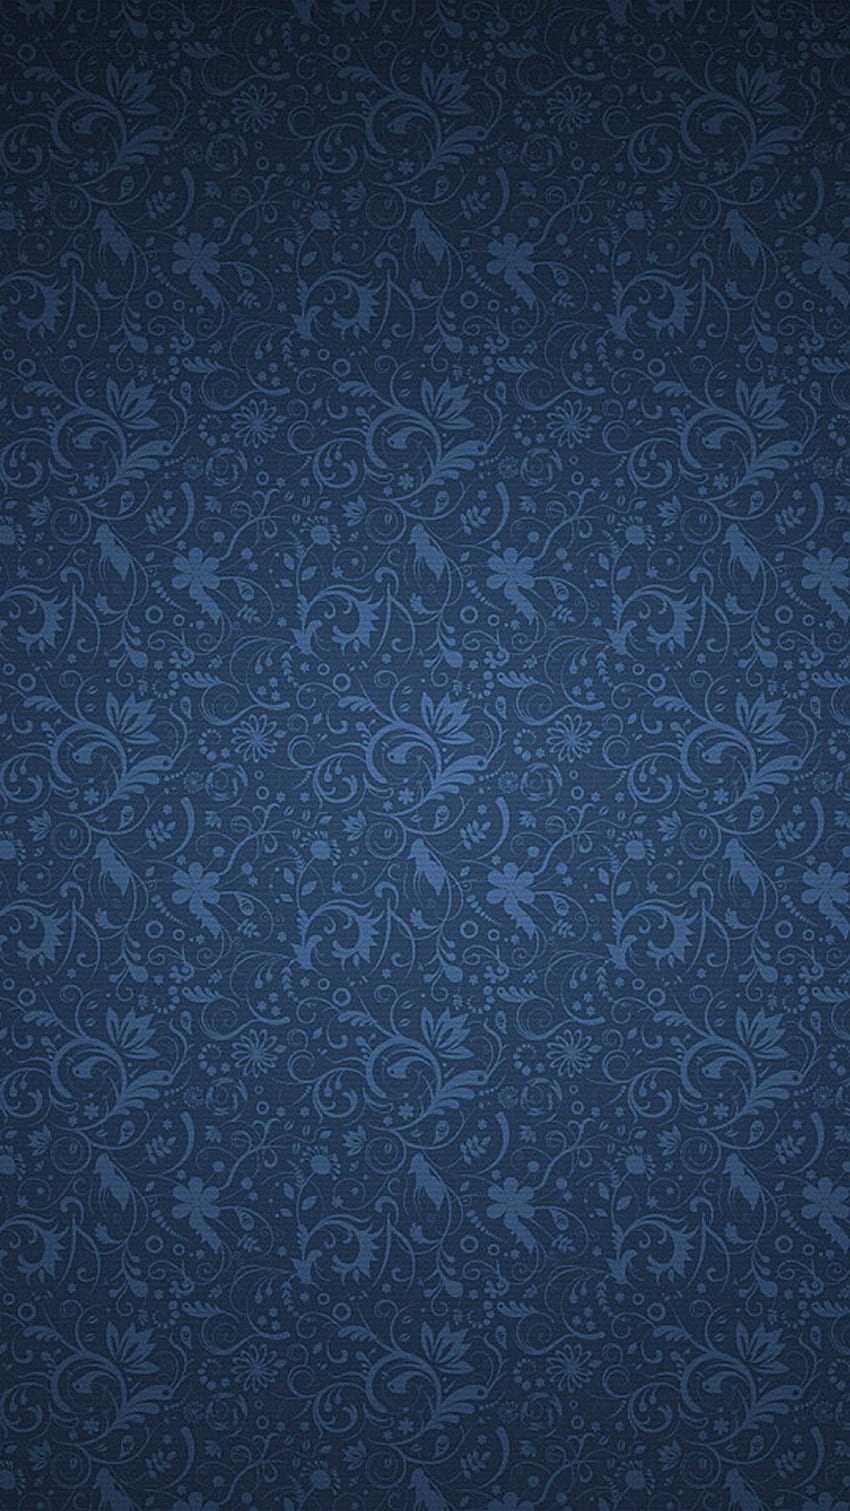 53200 Navy Blue Texture Stock Photos Pictures  RoyaltyFree Images   iStock  Navy blue texture wall Navy blue texture background